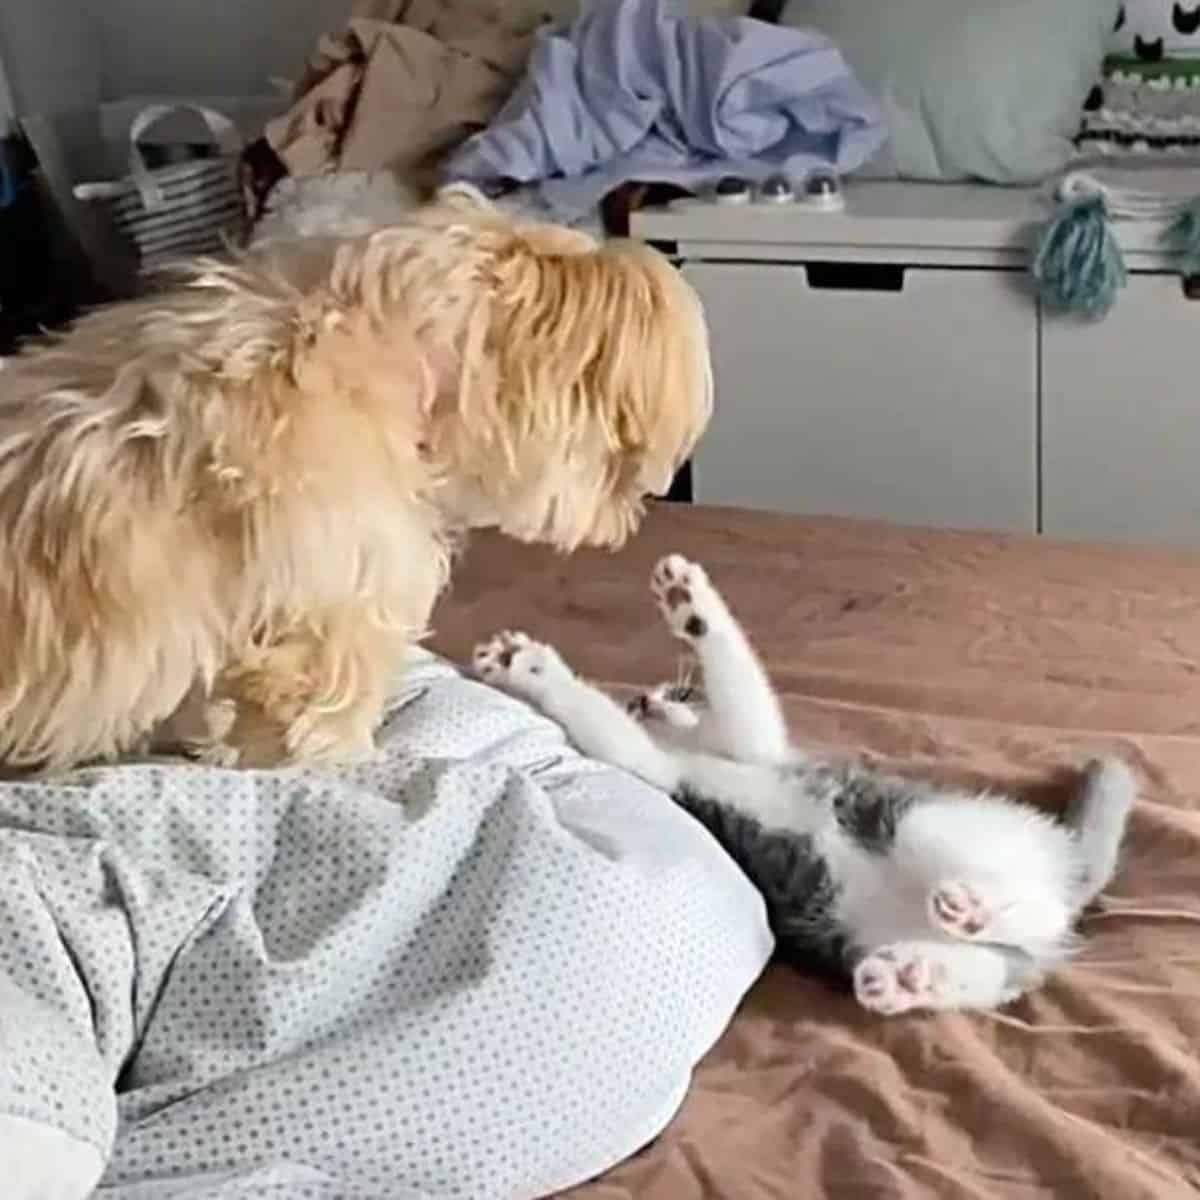 the kitten playing with a dog on a bed